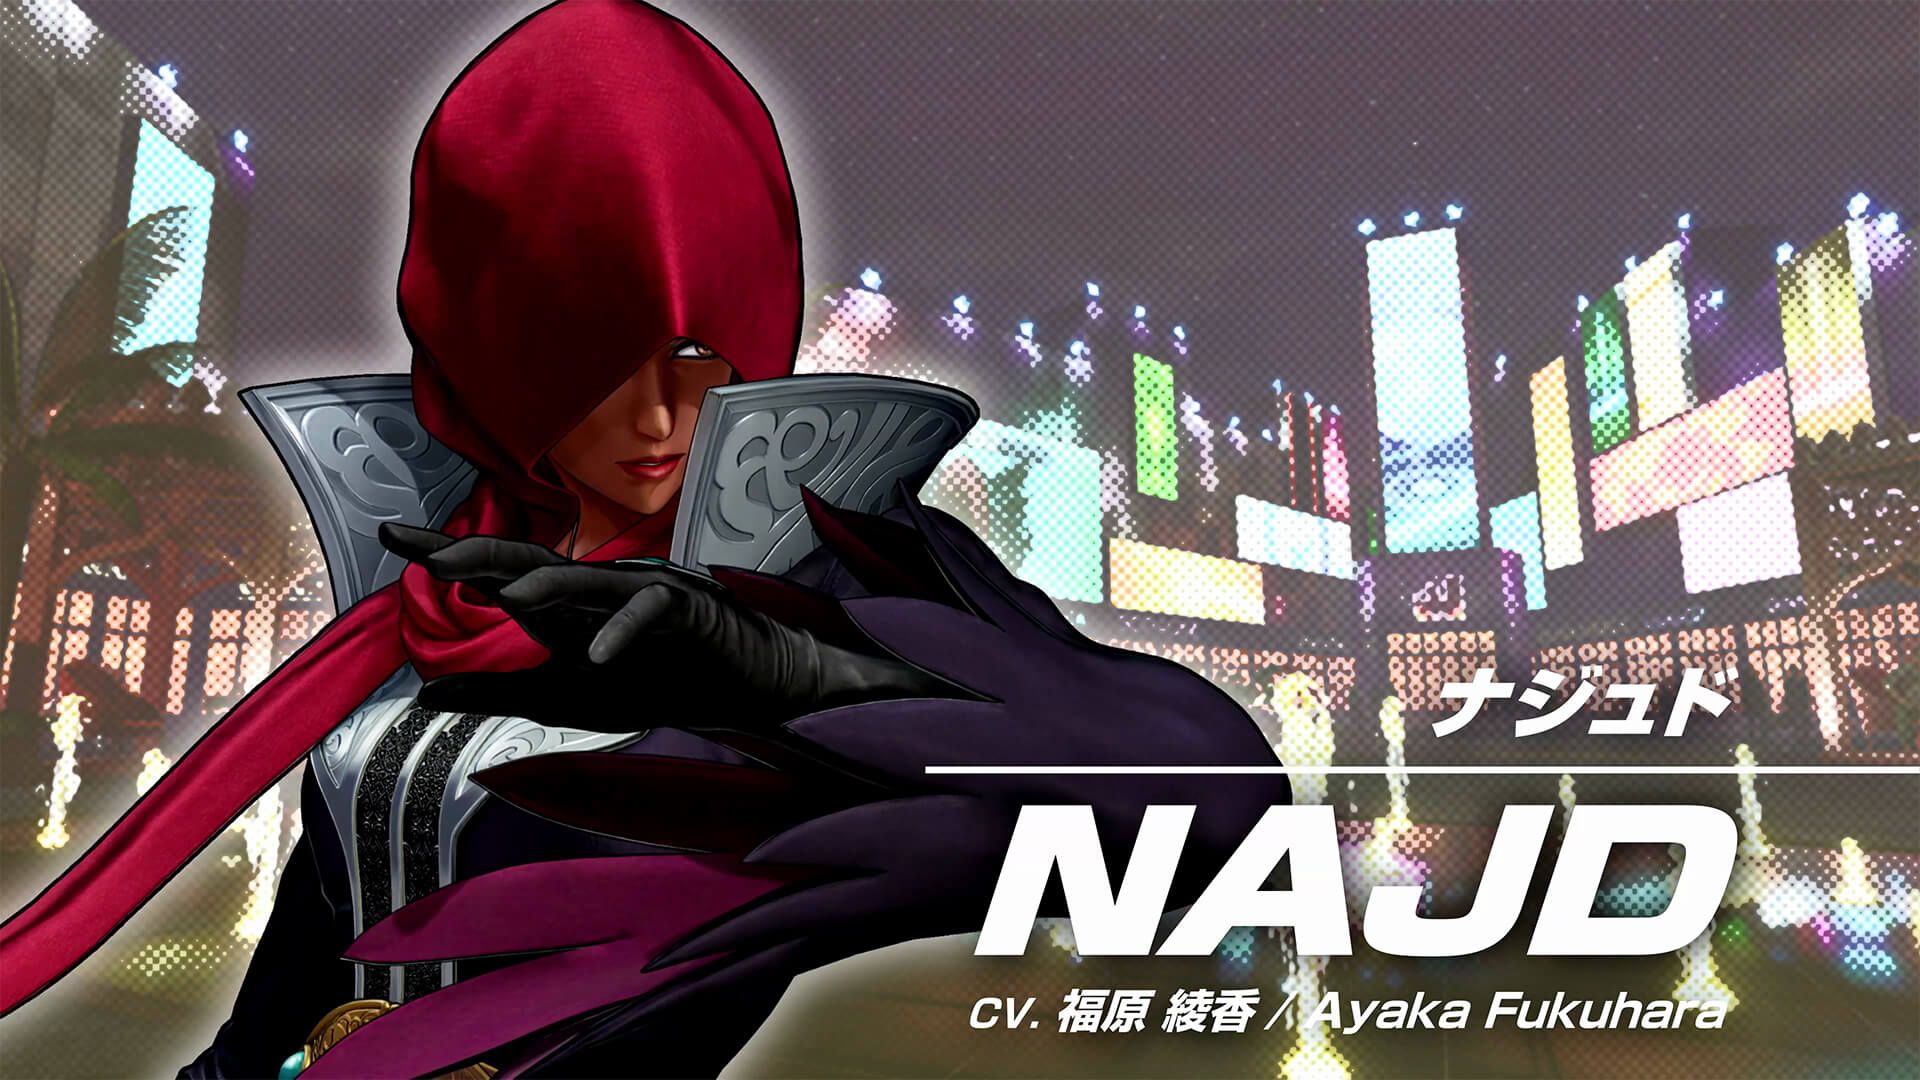 THE KING OF FIGHTERS XV kicks off their first set of DLC